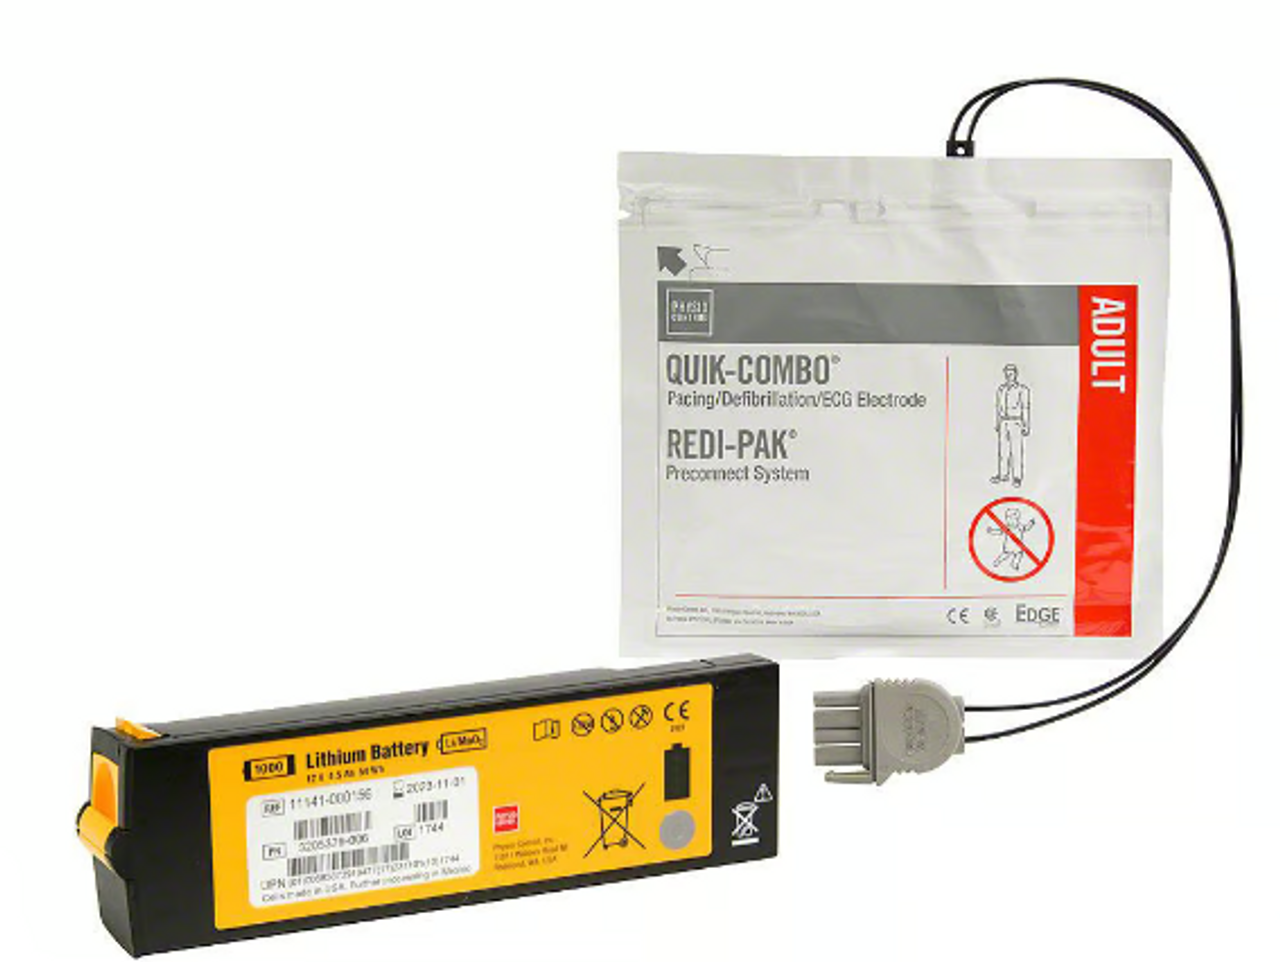 Physio Control Lifepak 1000 AED Solution Pack